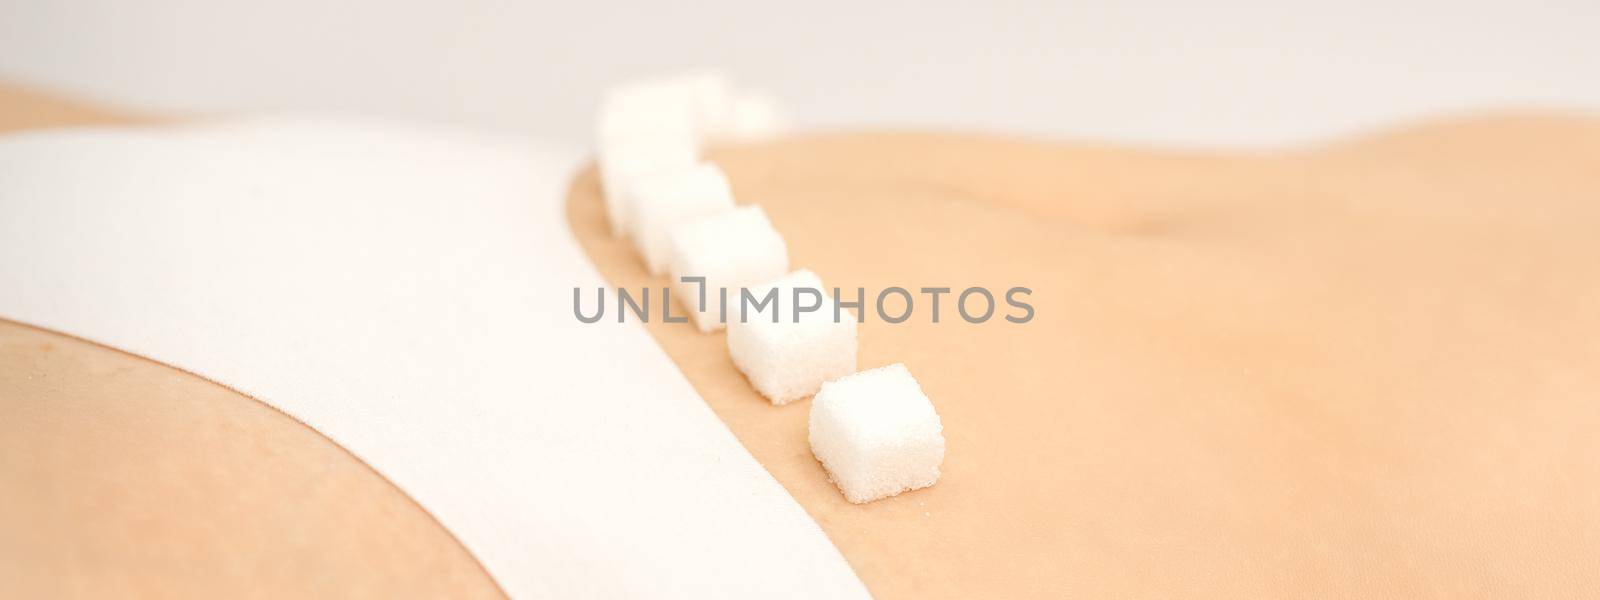 The concept of epilation, waxing, and intimate hygiene. Sugar cubes lying in a row on the bikini zone of a young white woman, close up